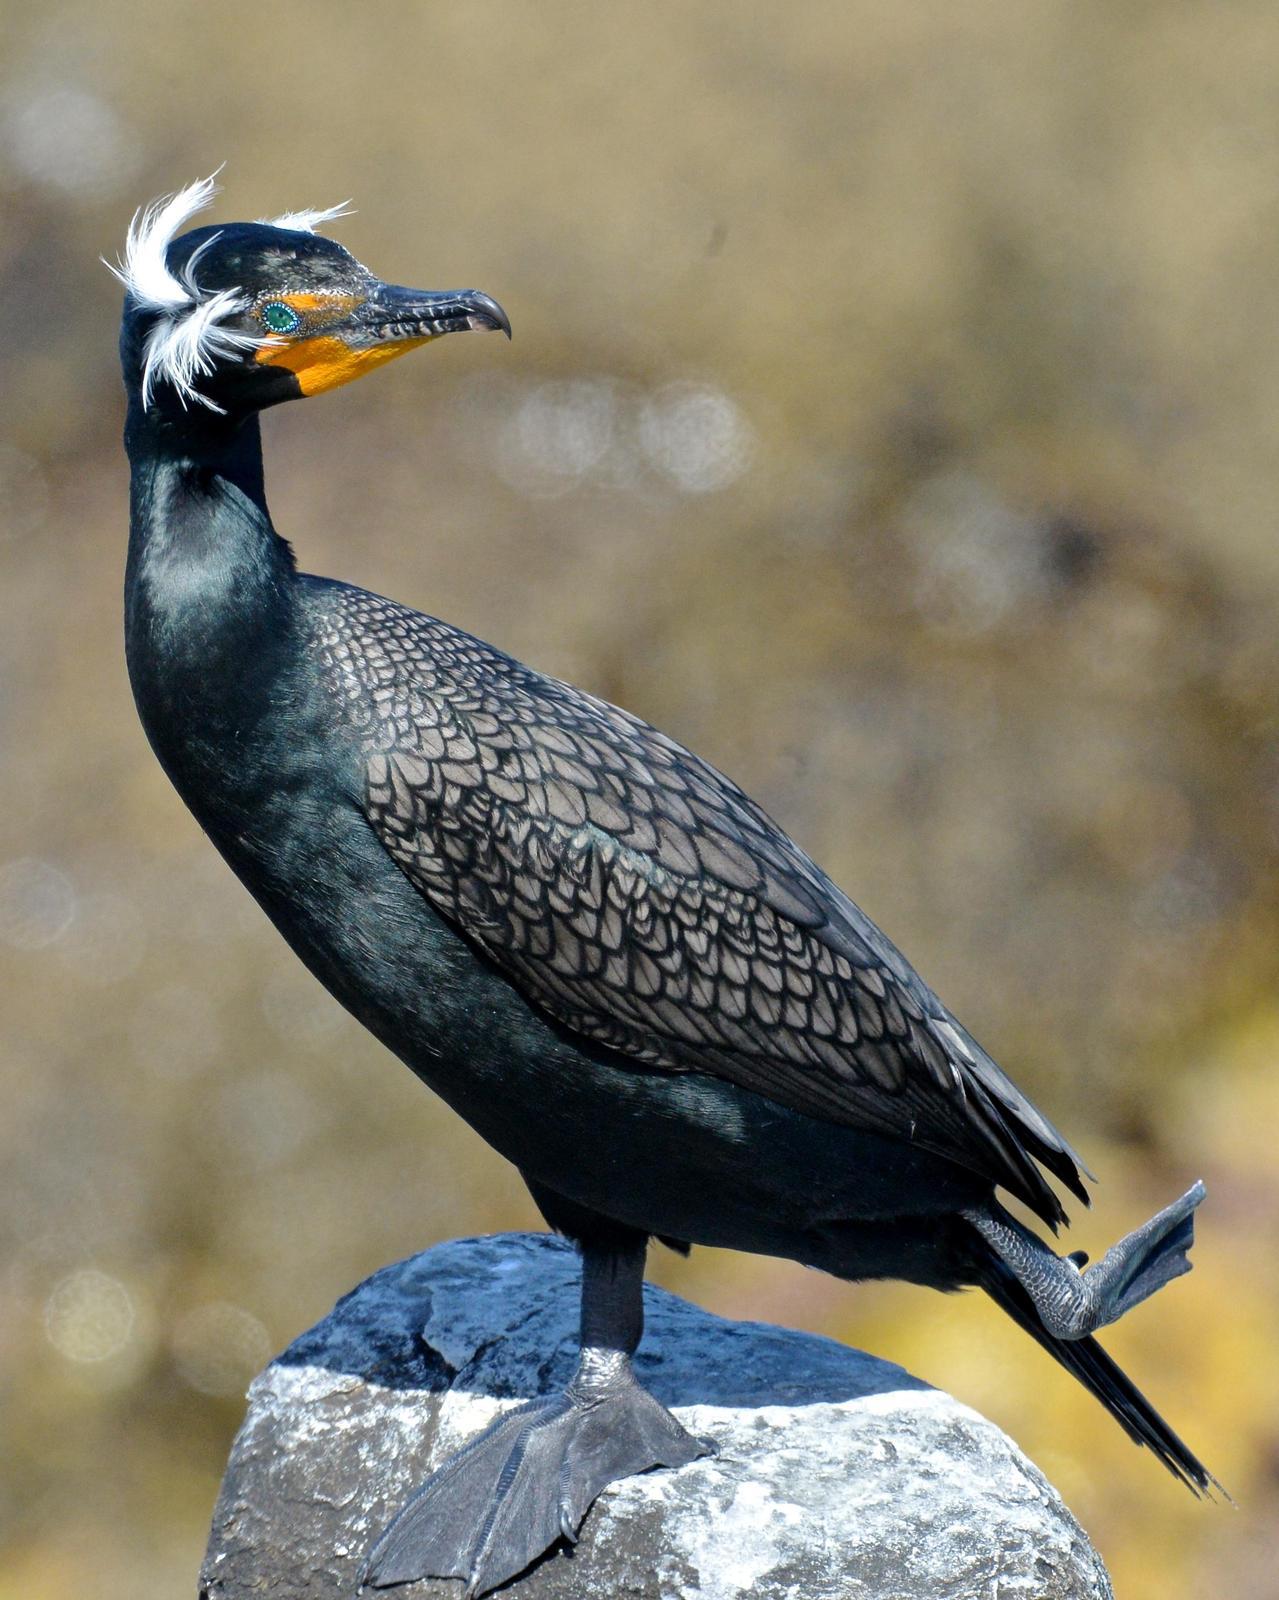 Double-crested Cormorant Photo by Gerald Friesen